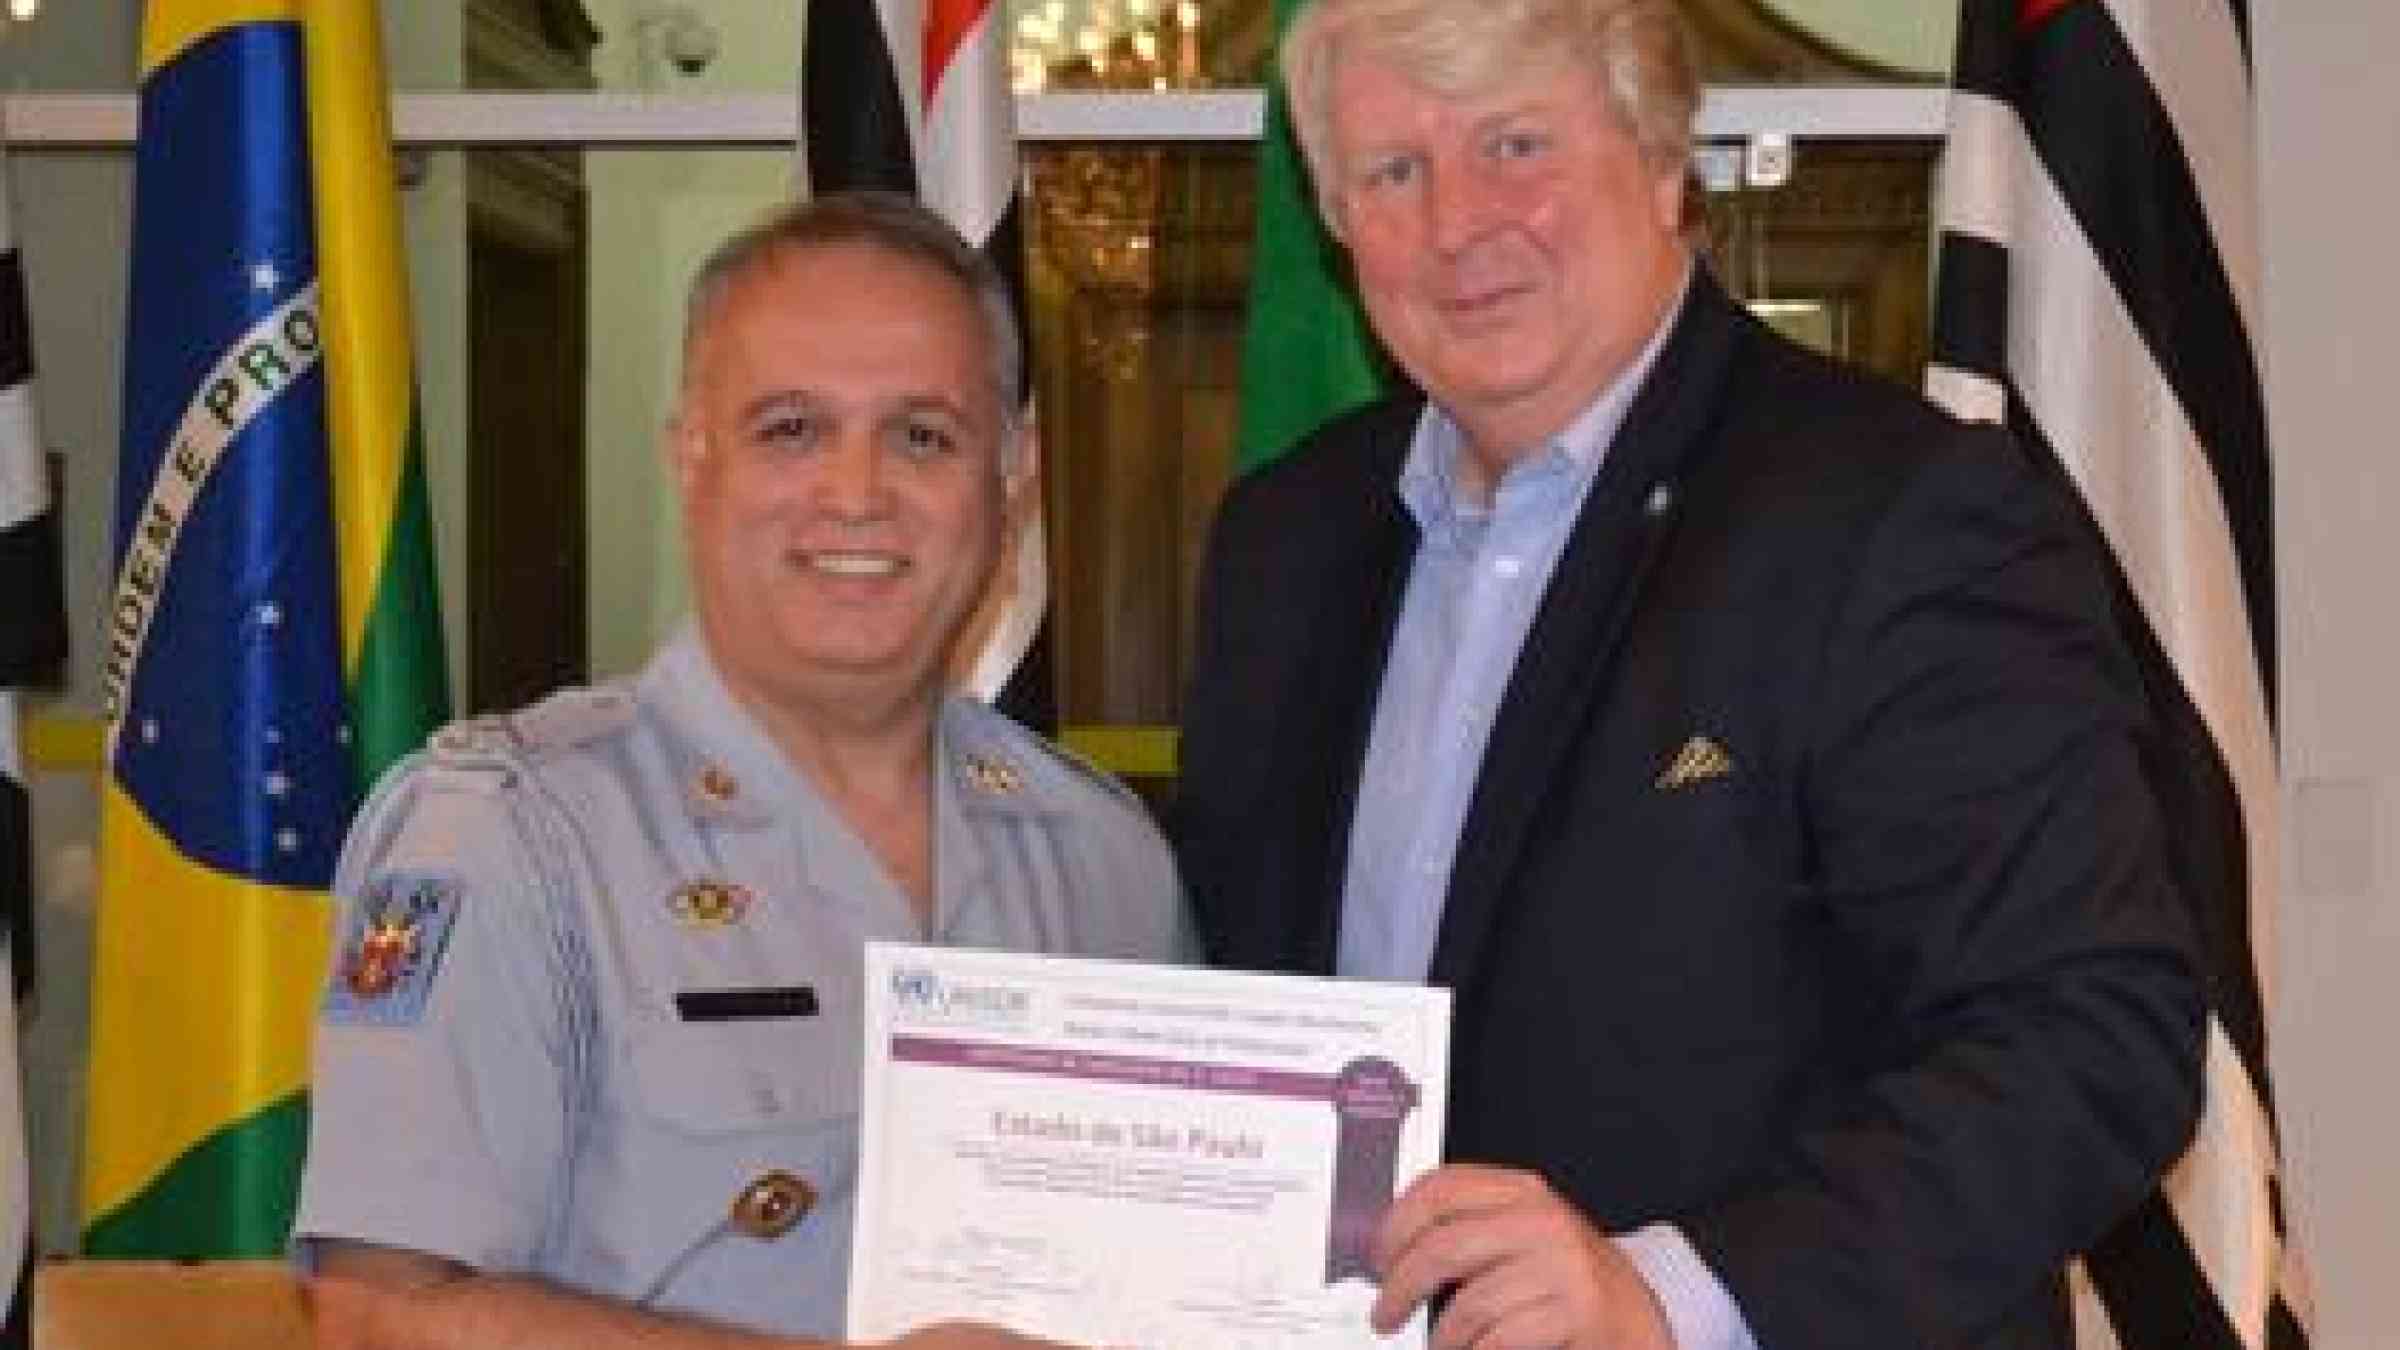 Colonel José Roberto Rodrigues de Oliveira, Coordinator of the São Paulo State Civil Defence received from UNISDR Senior Programme Advisor David Stevens the Certificate of Completion of the LGSAT (Local Government Self-Assessment Tool ) report for the second cycle. (Photo: UNISDR)